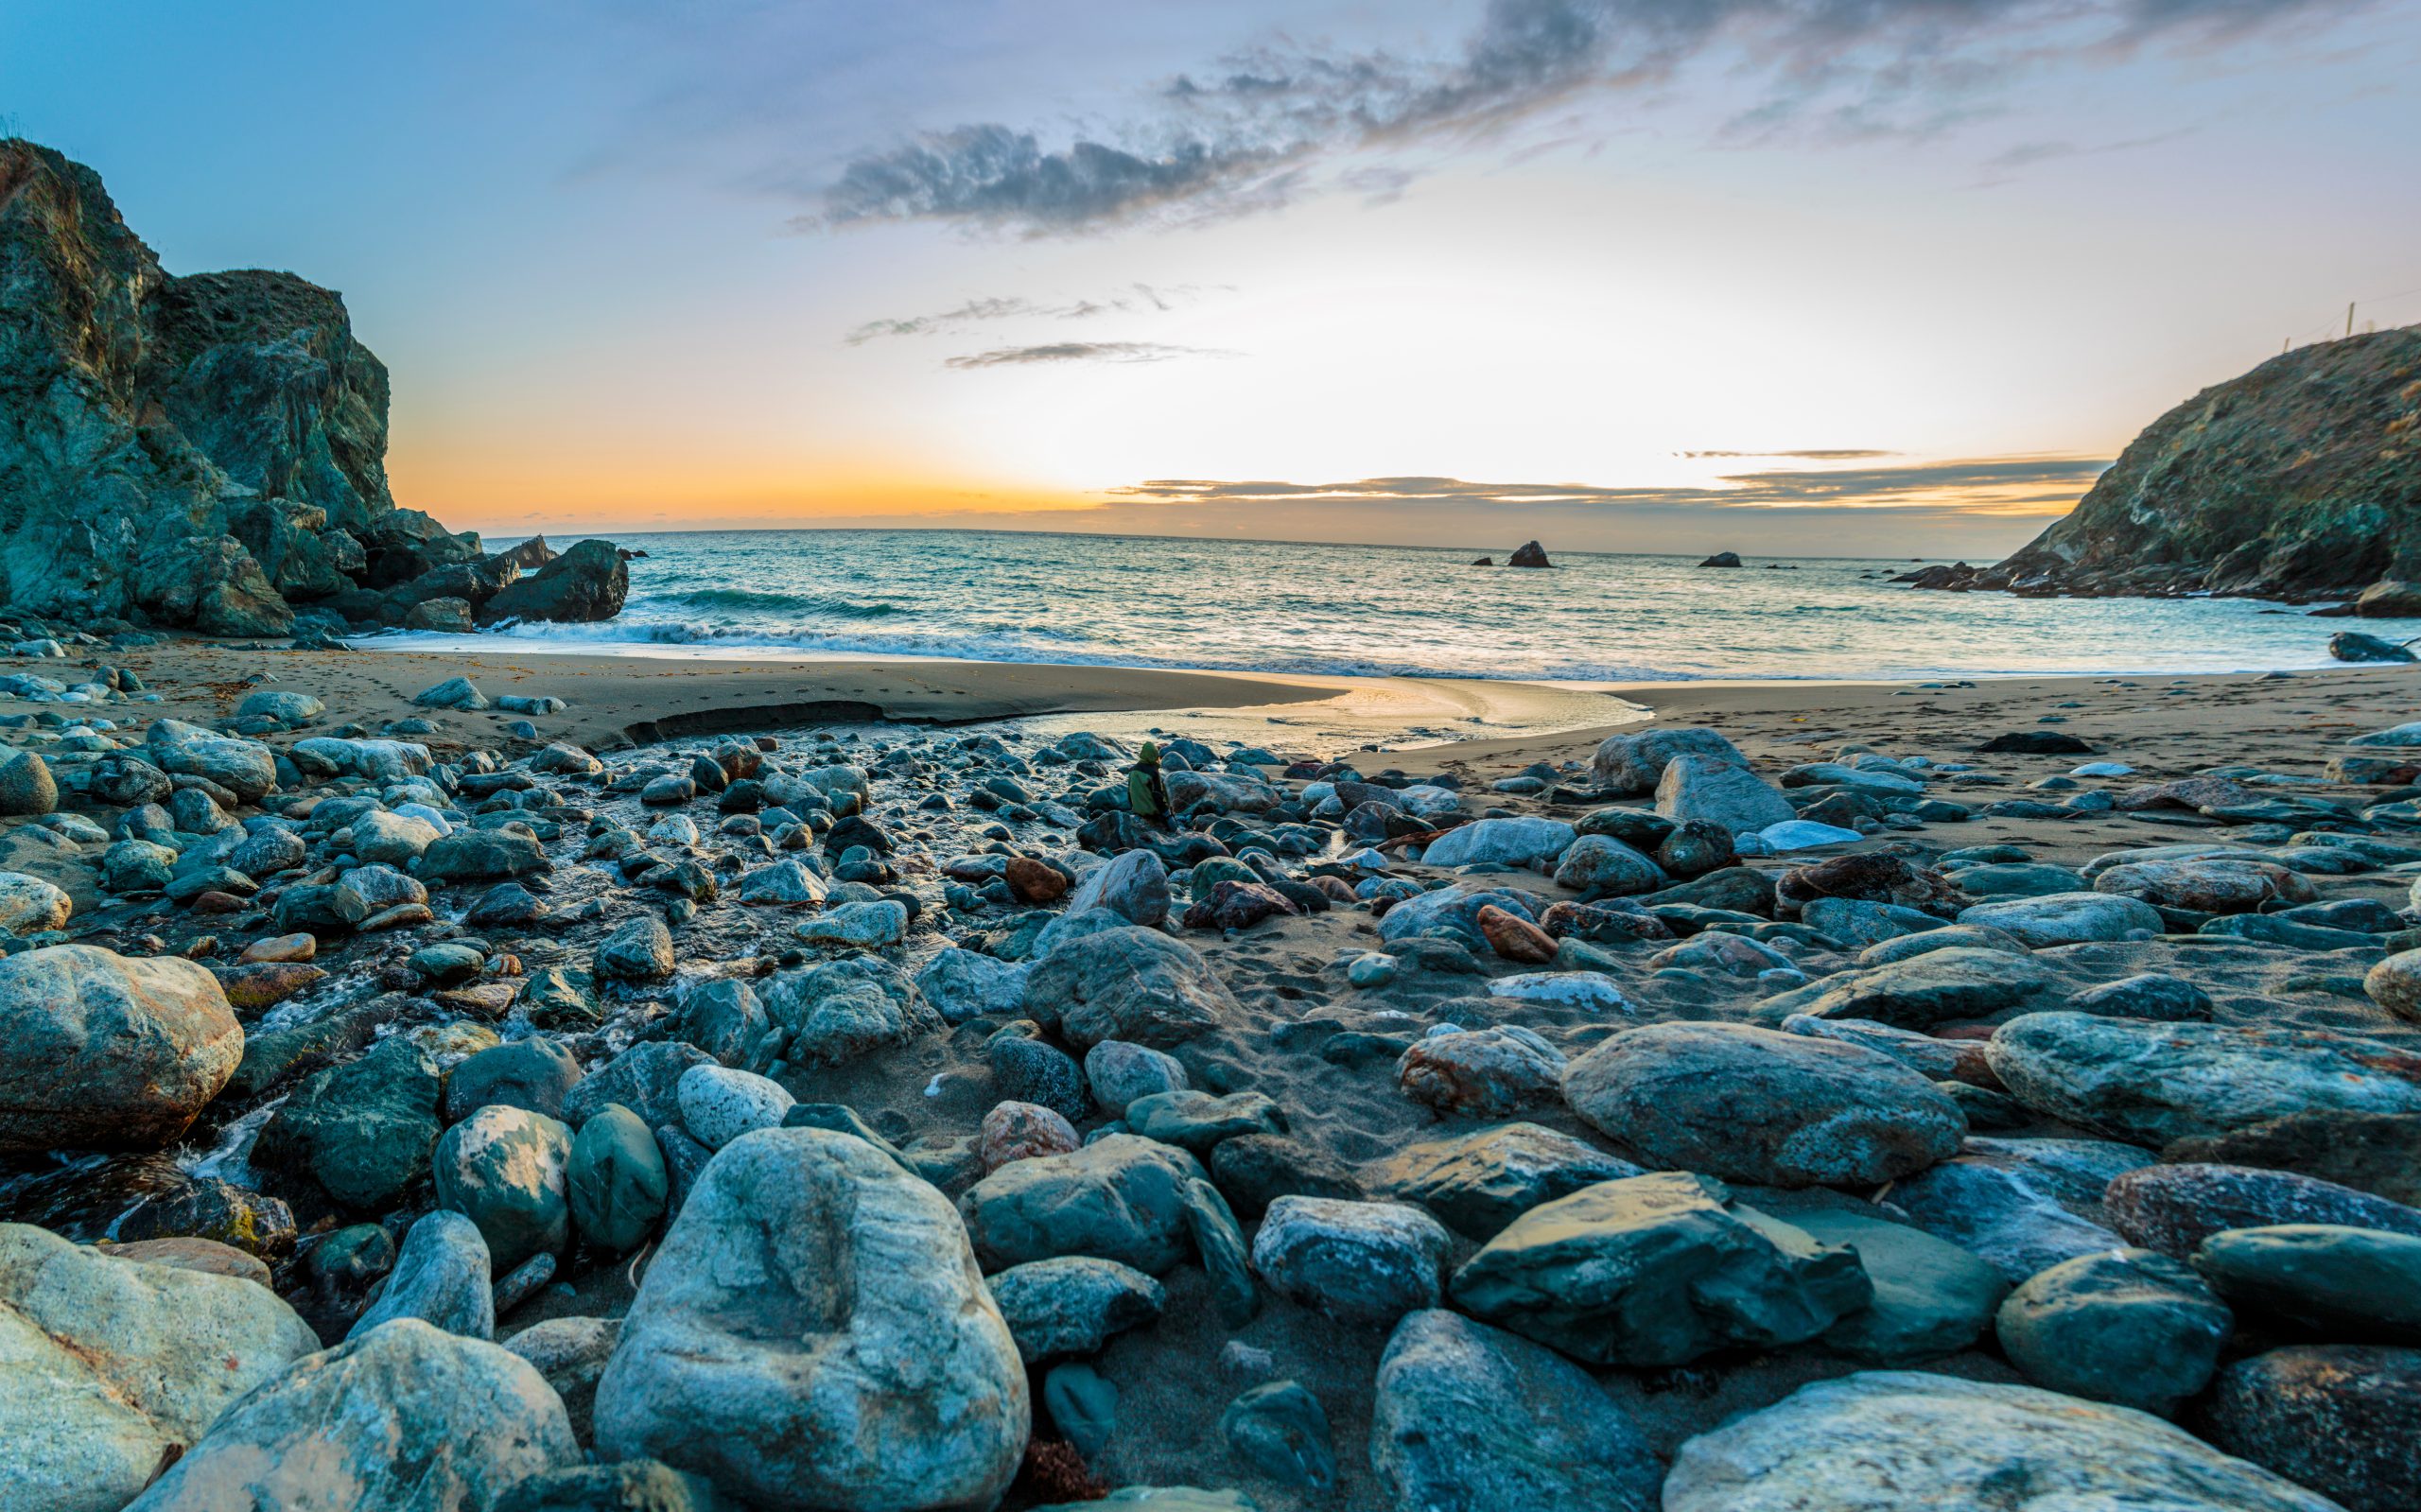 Limekiln State Park's rocky beach at sunset, just off of Highway 1 in Big Sur, California